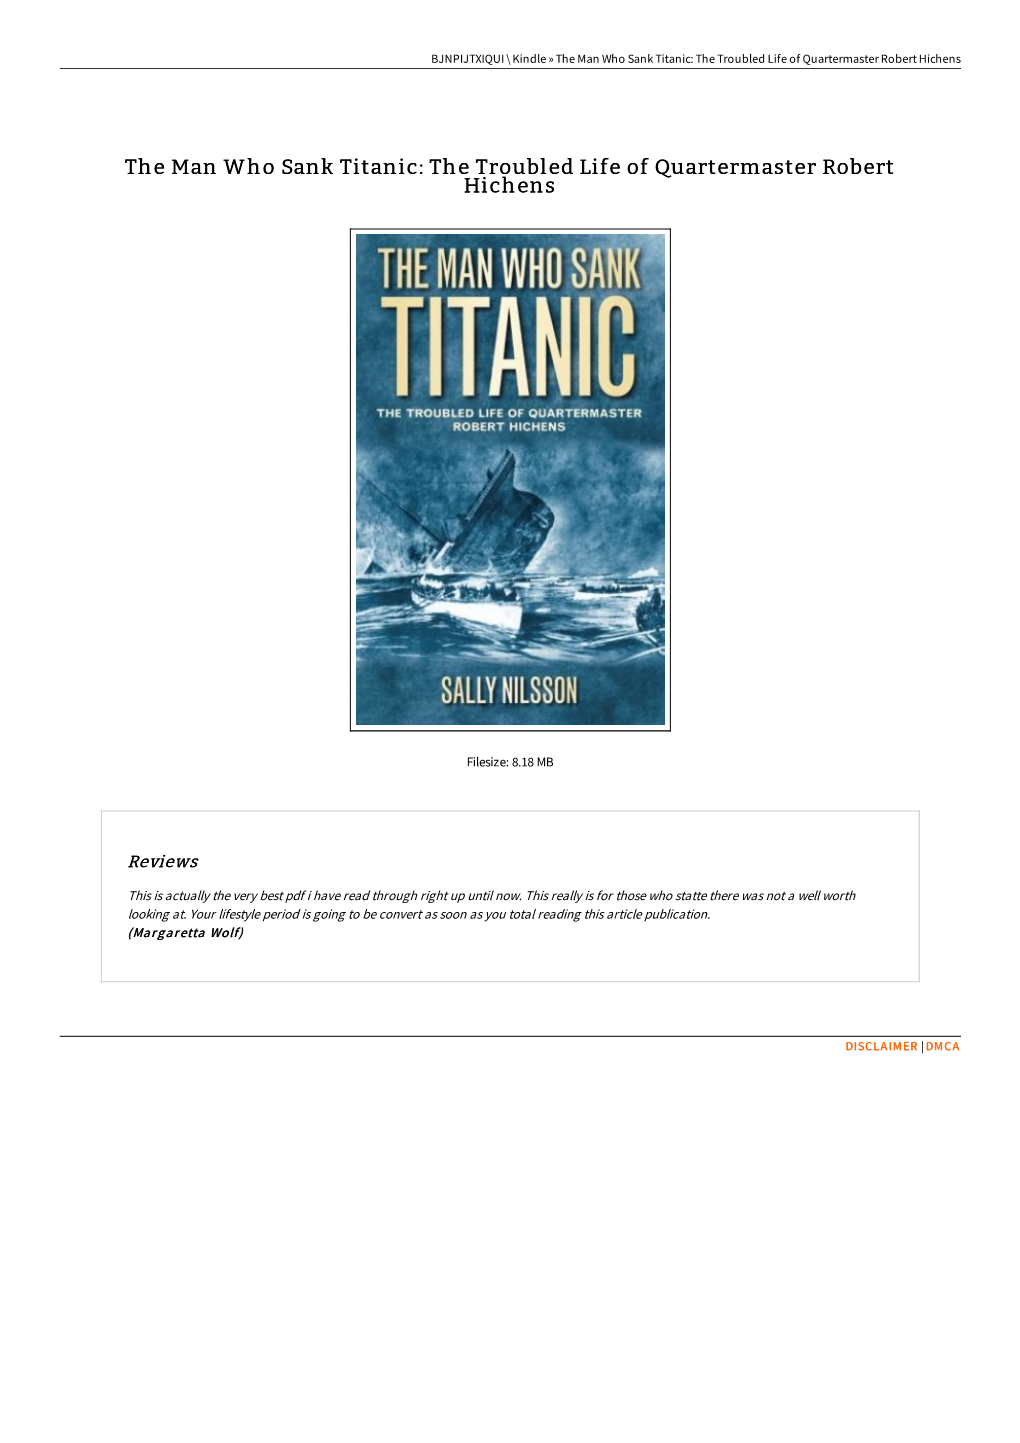 Download PDF / the Man Who Sank Titanic: the Troubled Life Of